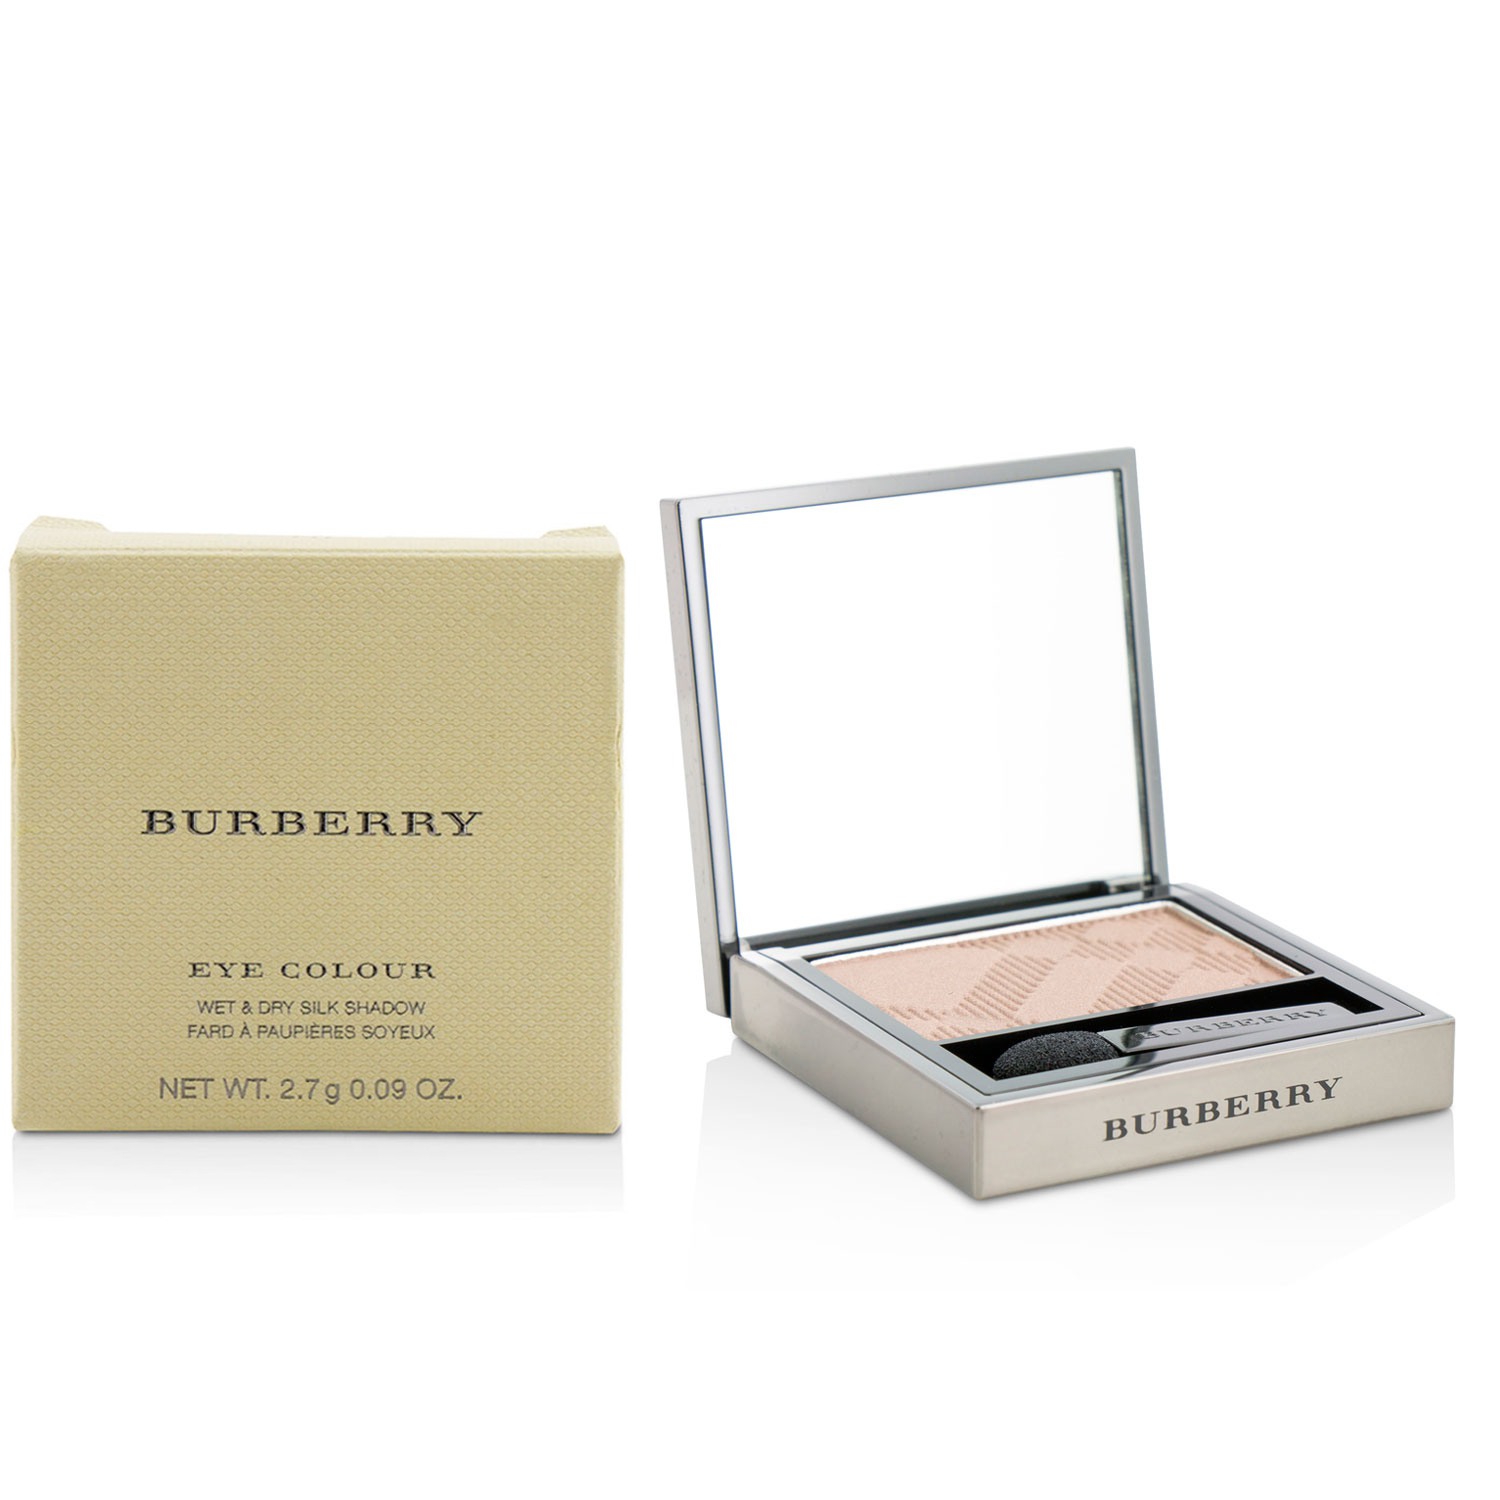 Eye Colour Wet & Dry Silk Shadow - # No. 202 Rosewood Burberry Image